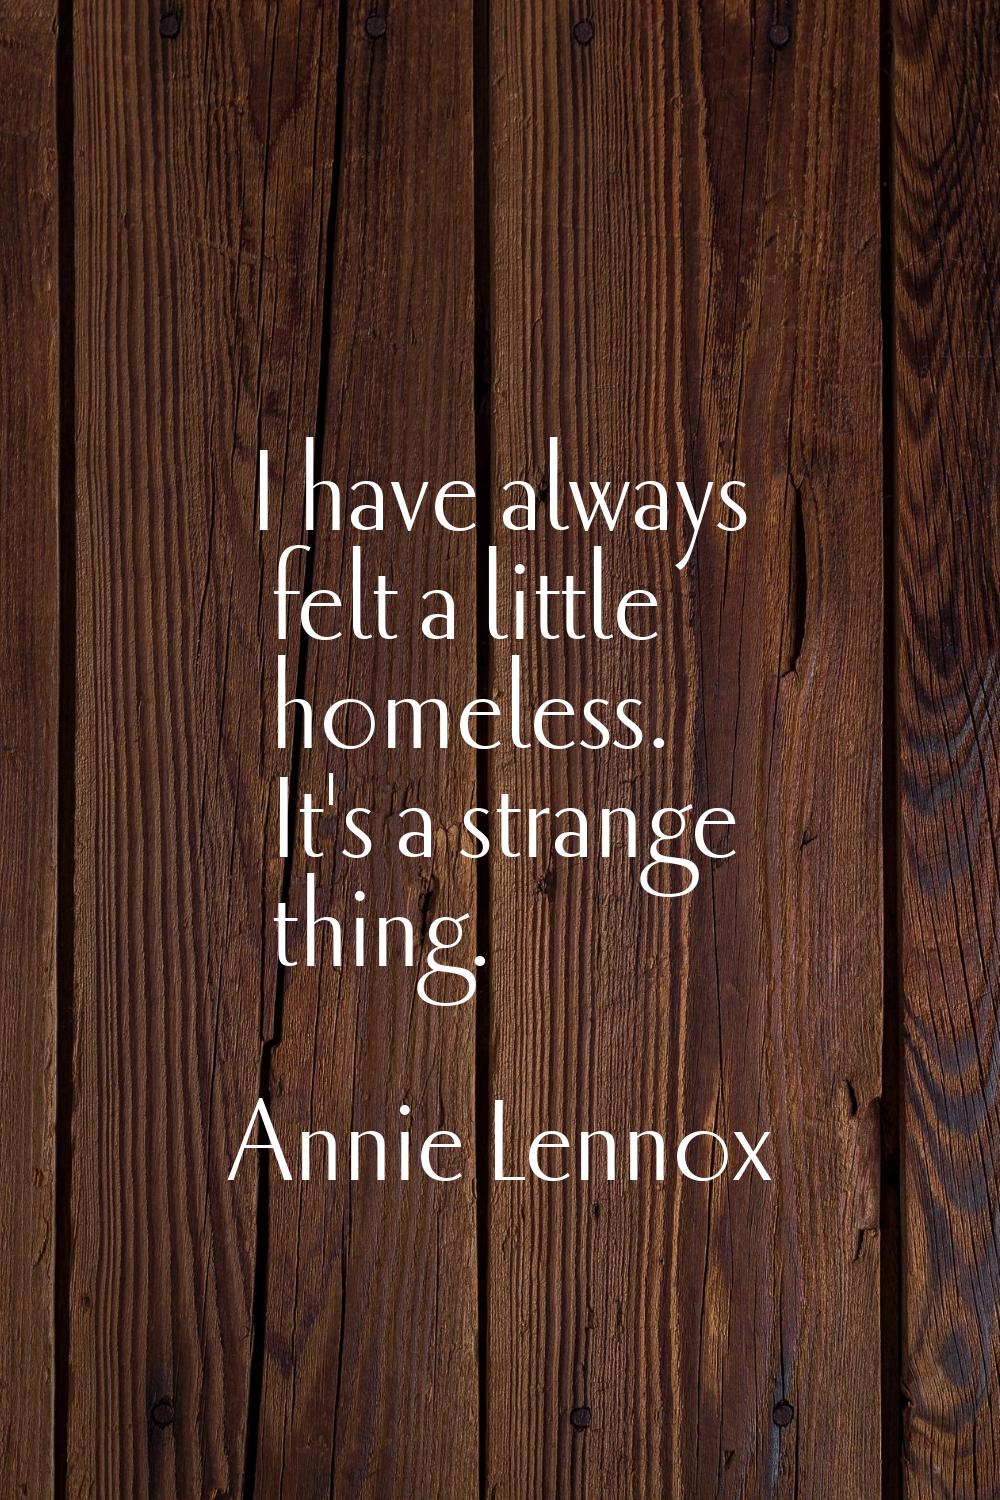 I have always felt a little homeless. It's a strange thing.